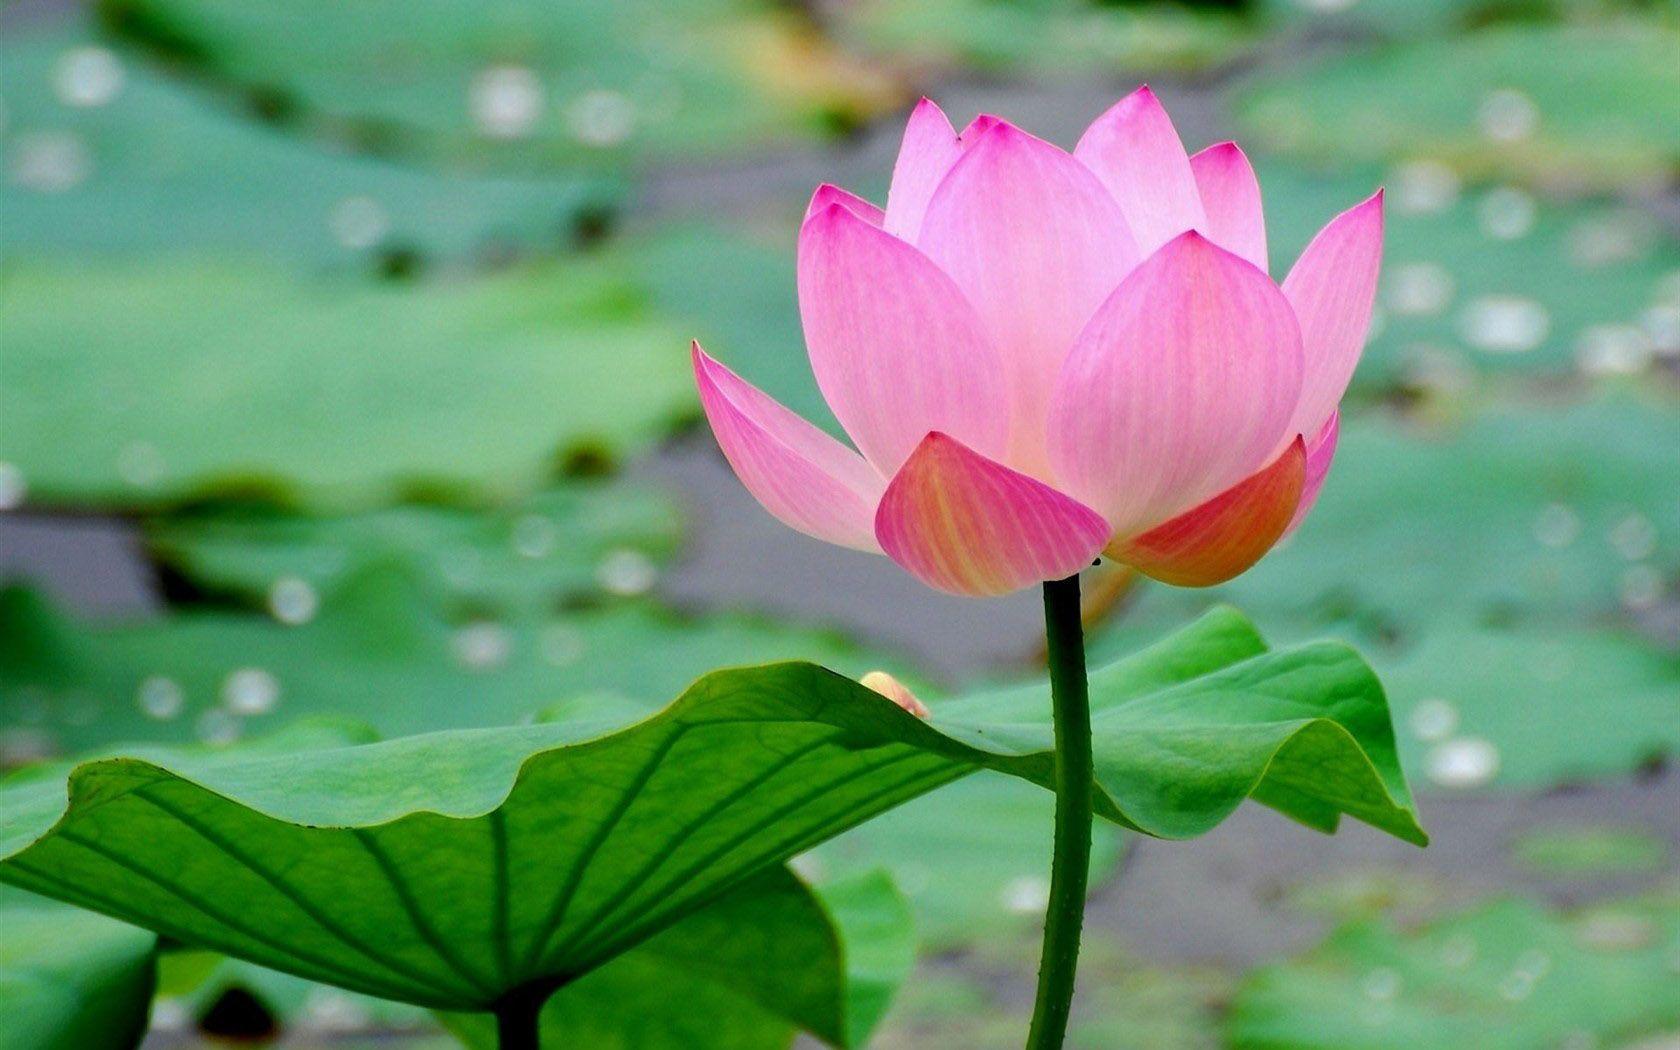 Louts flower. Lotus flower image